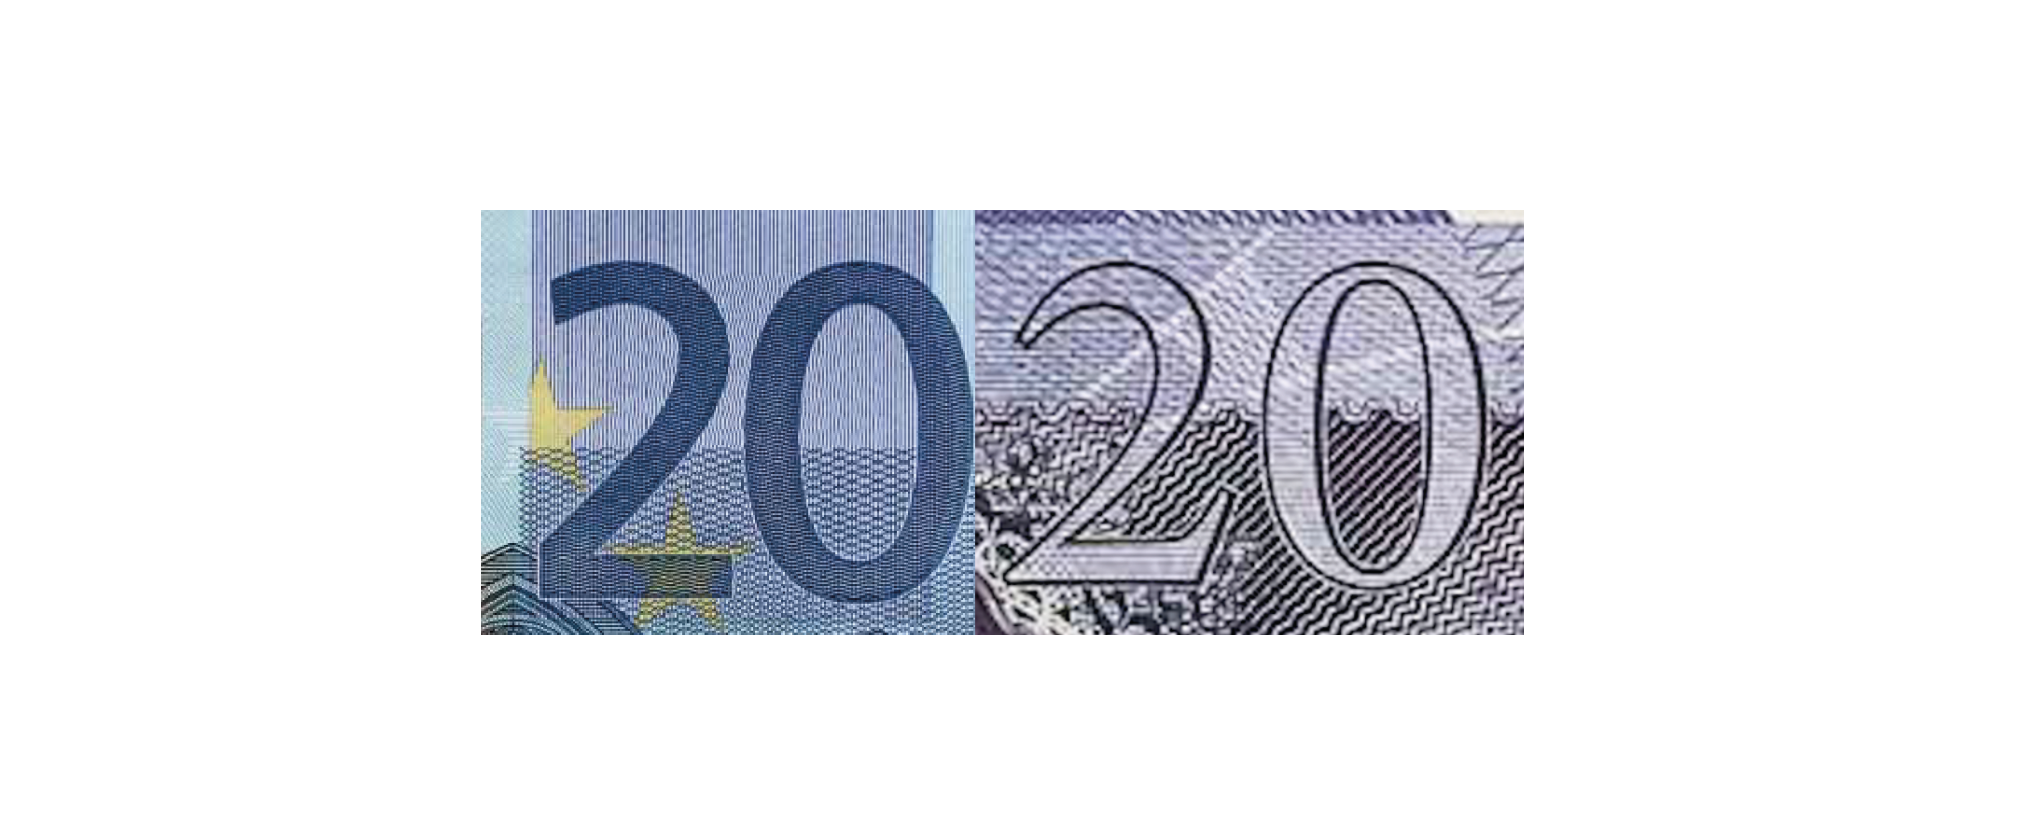 2020 currency predictions